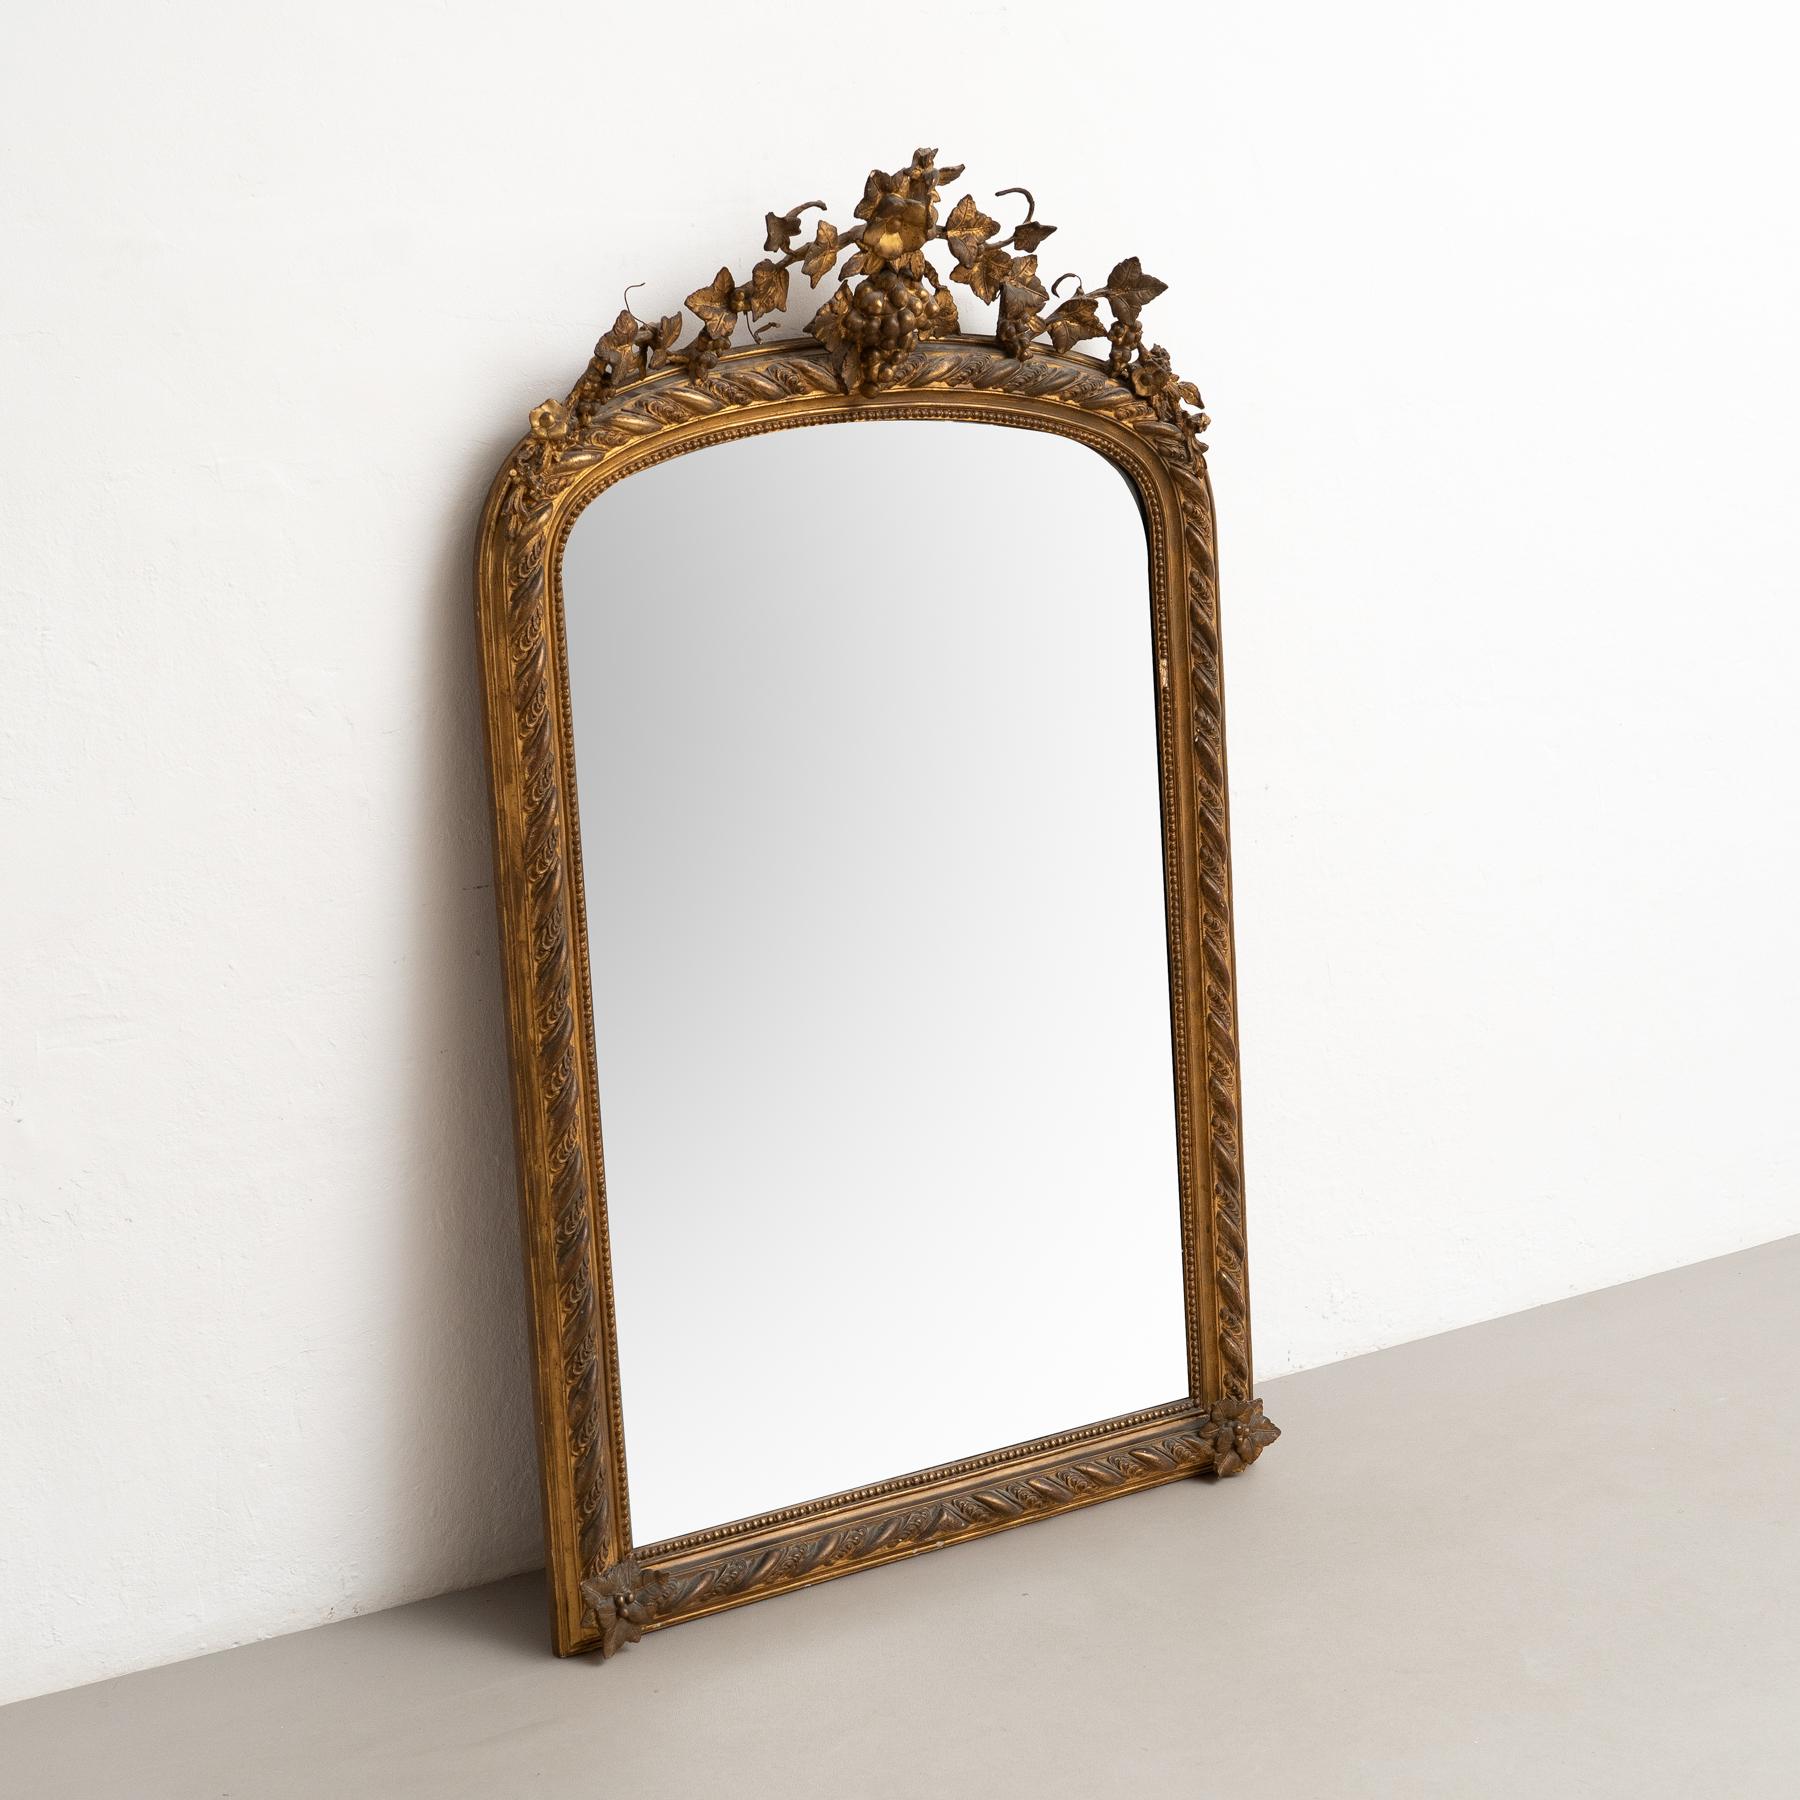 Antique Napoleon III Style Gilded Wood and Stucco Mirror, Early 20th Century For Sale 1